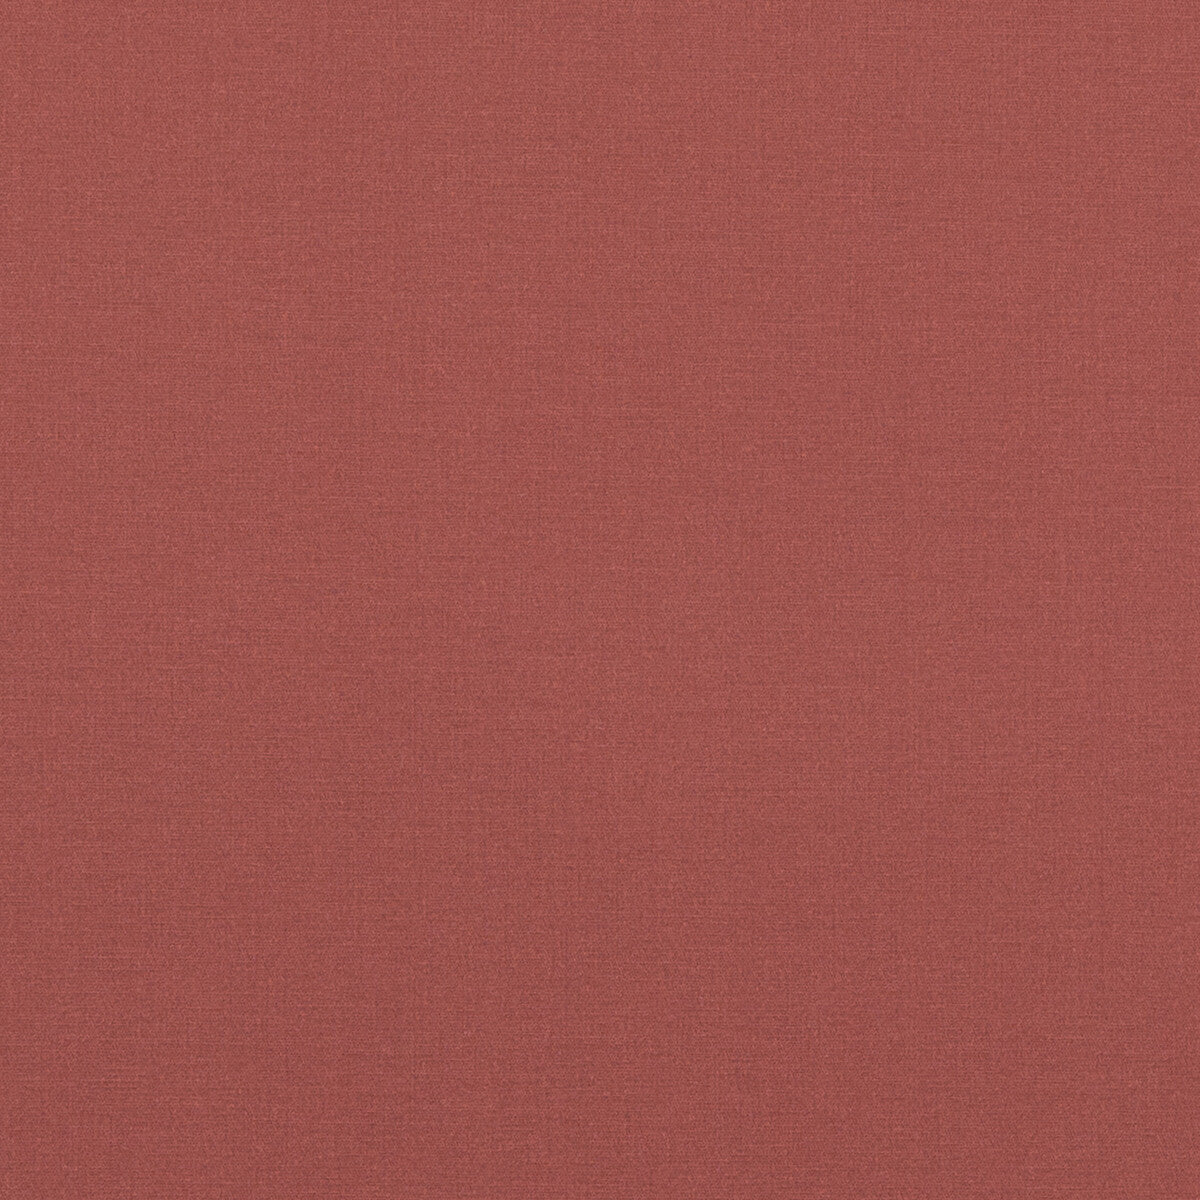 Pavilion fabric in rose color - pattern PF50478.400.0 - by Baker Lifestyle in the Pavilion - Blegrave Notebook collection